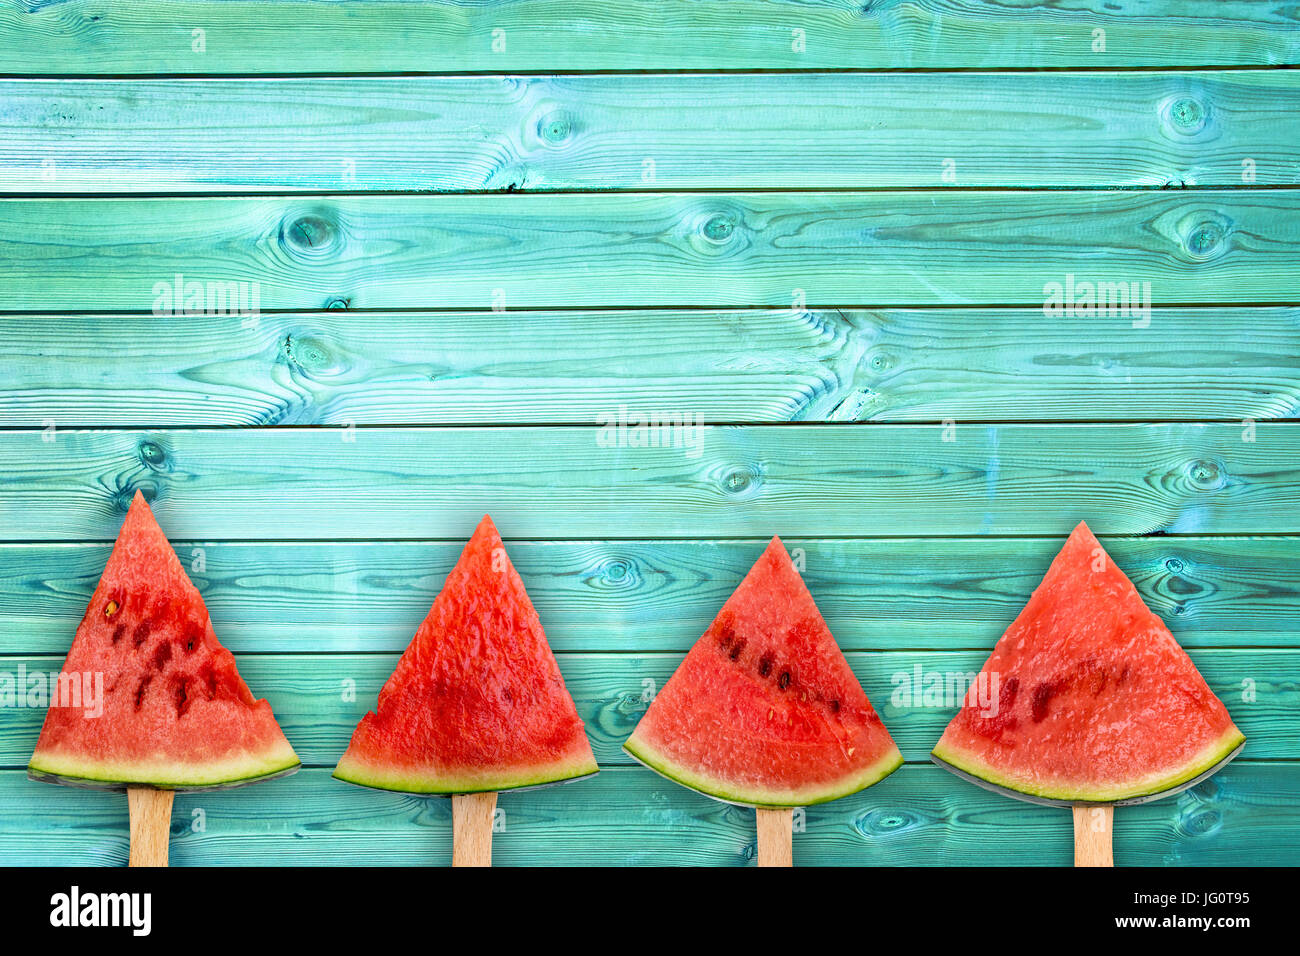 Four watermelon slice popsicles on blue wood background with copy space, fresh summer fruit concept Stock Photo